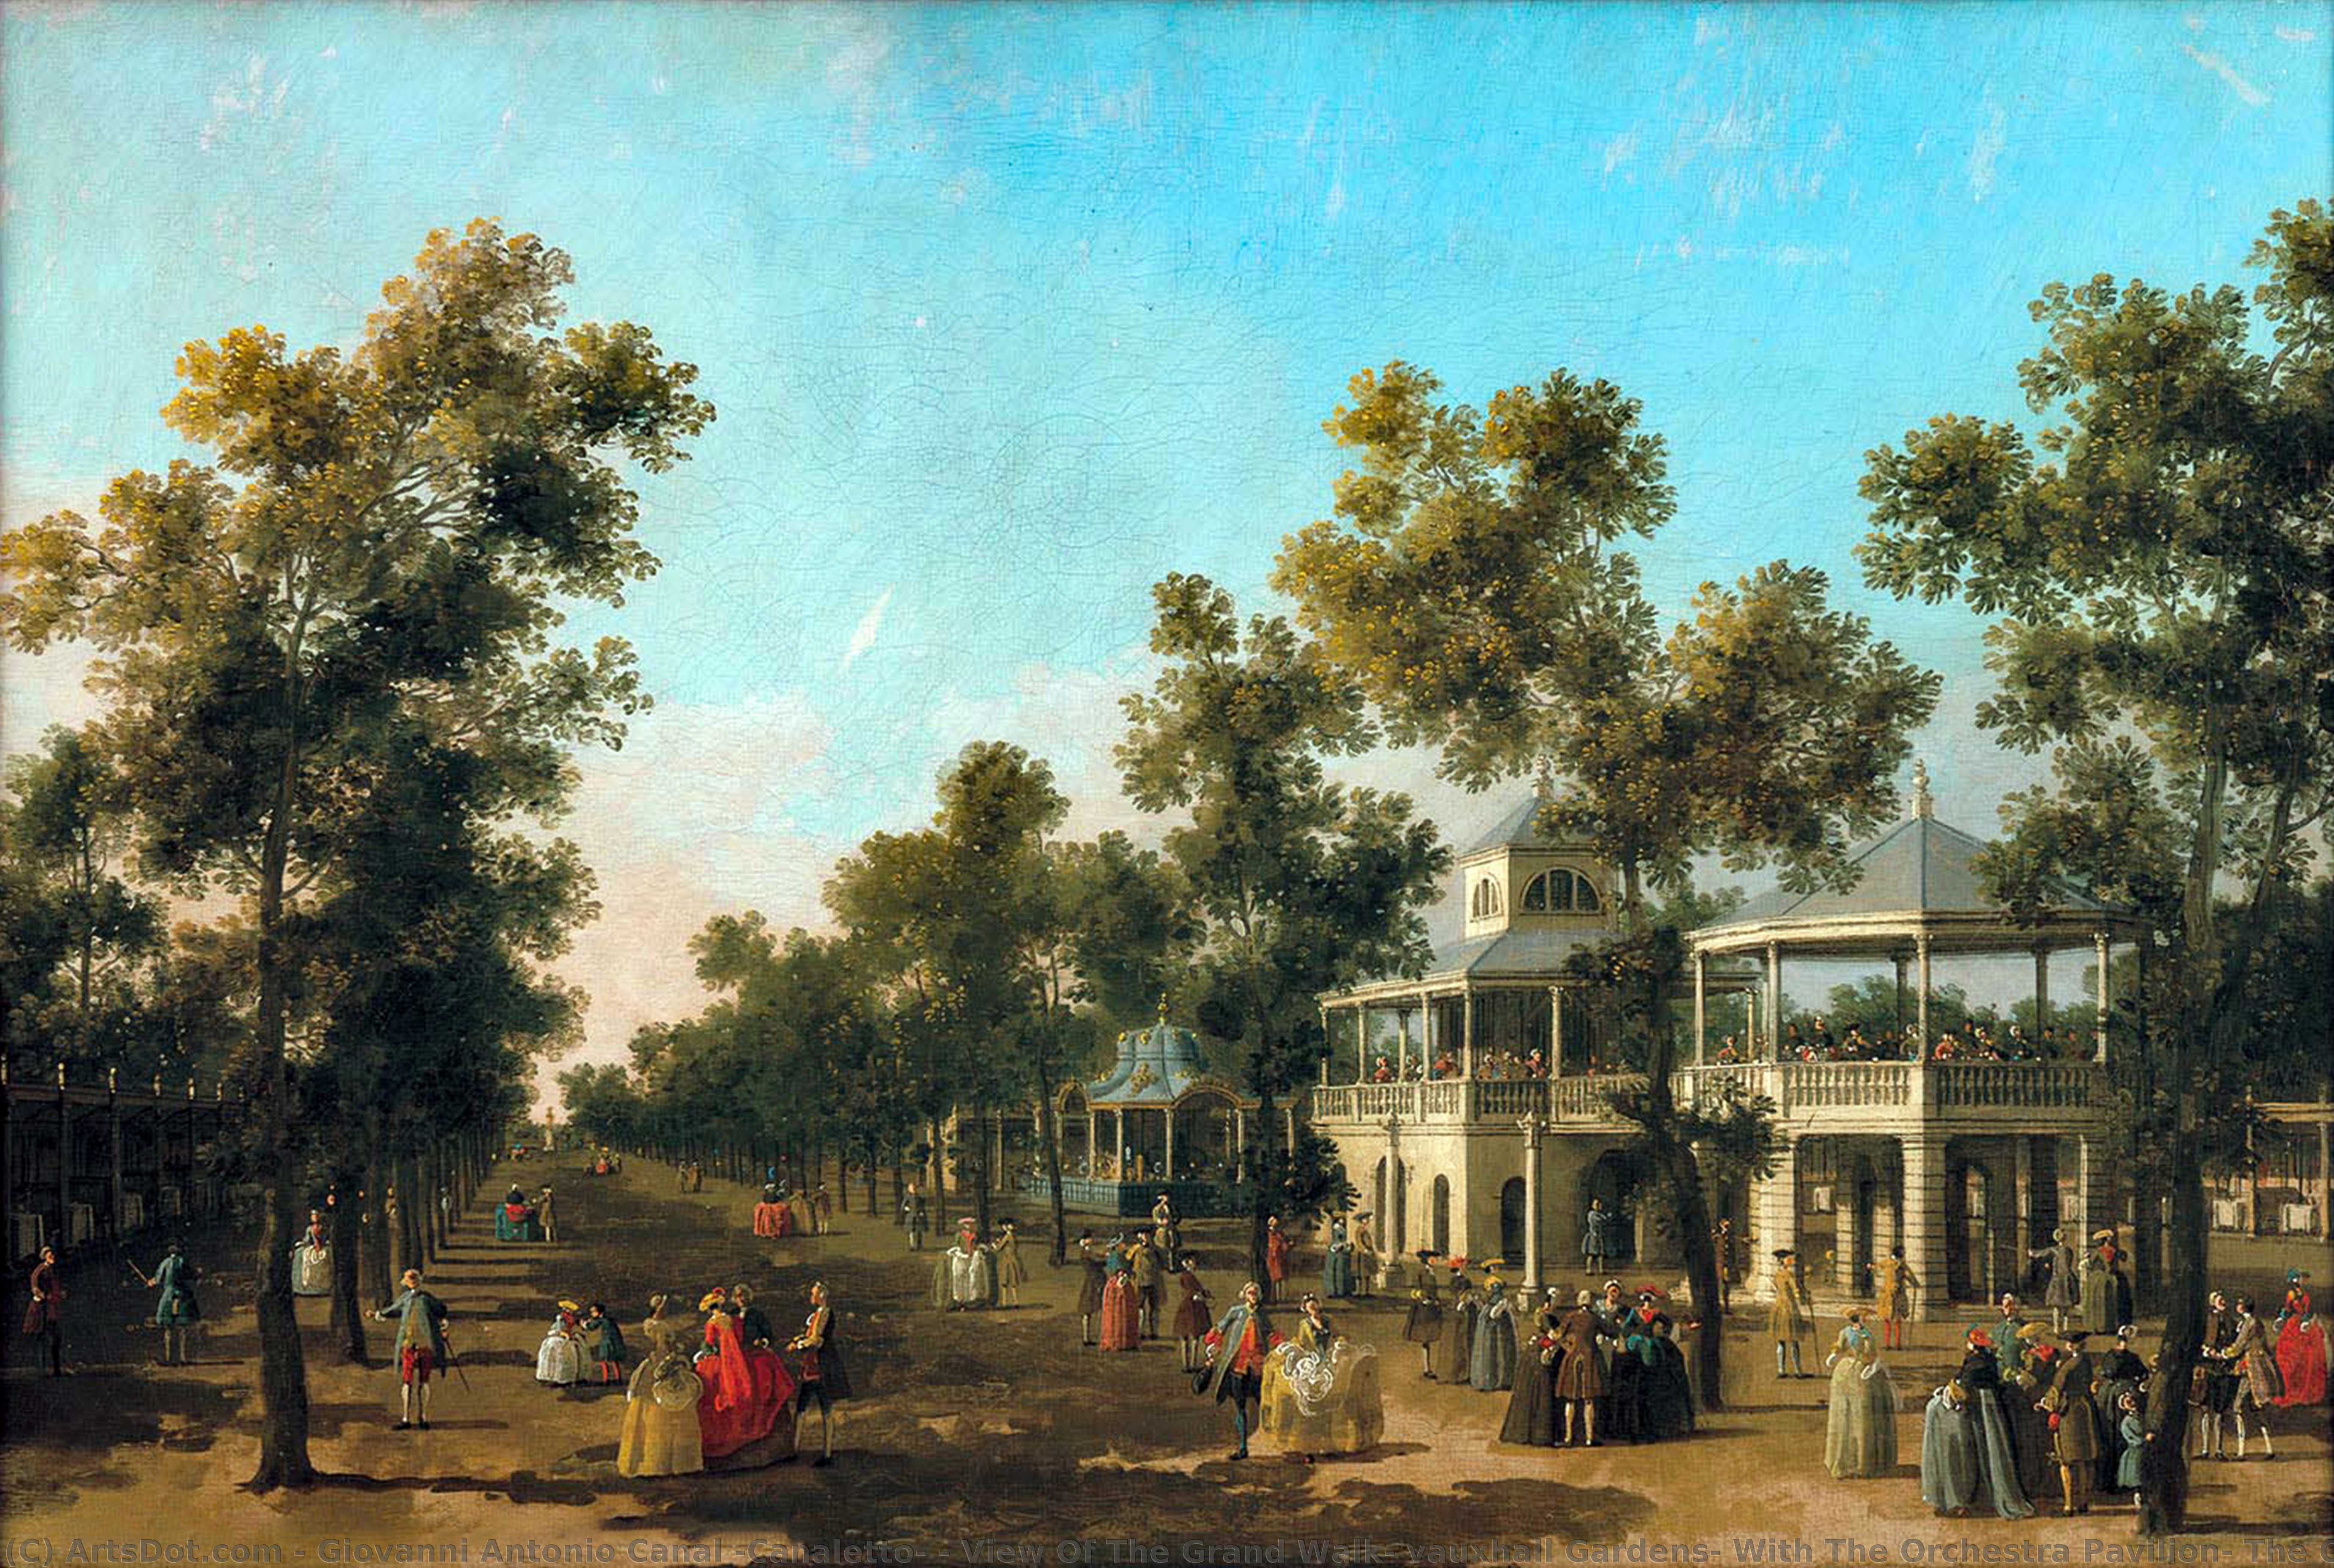 WikiOO.org - Енциклопедія образотворчого мистецтва - Живопис, Картини
 Giovanni Antonio Canal (Canaletto) - View Of The Grand Walk, vauxhall Gardens, With The Orchestra Pavilion, The Organ House, The Turkish Dining Tent And The Statue Of Aurora